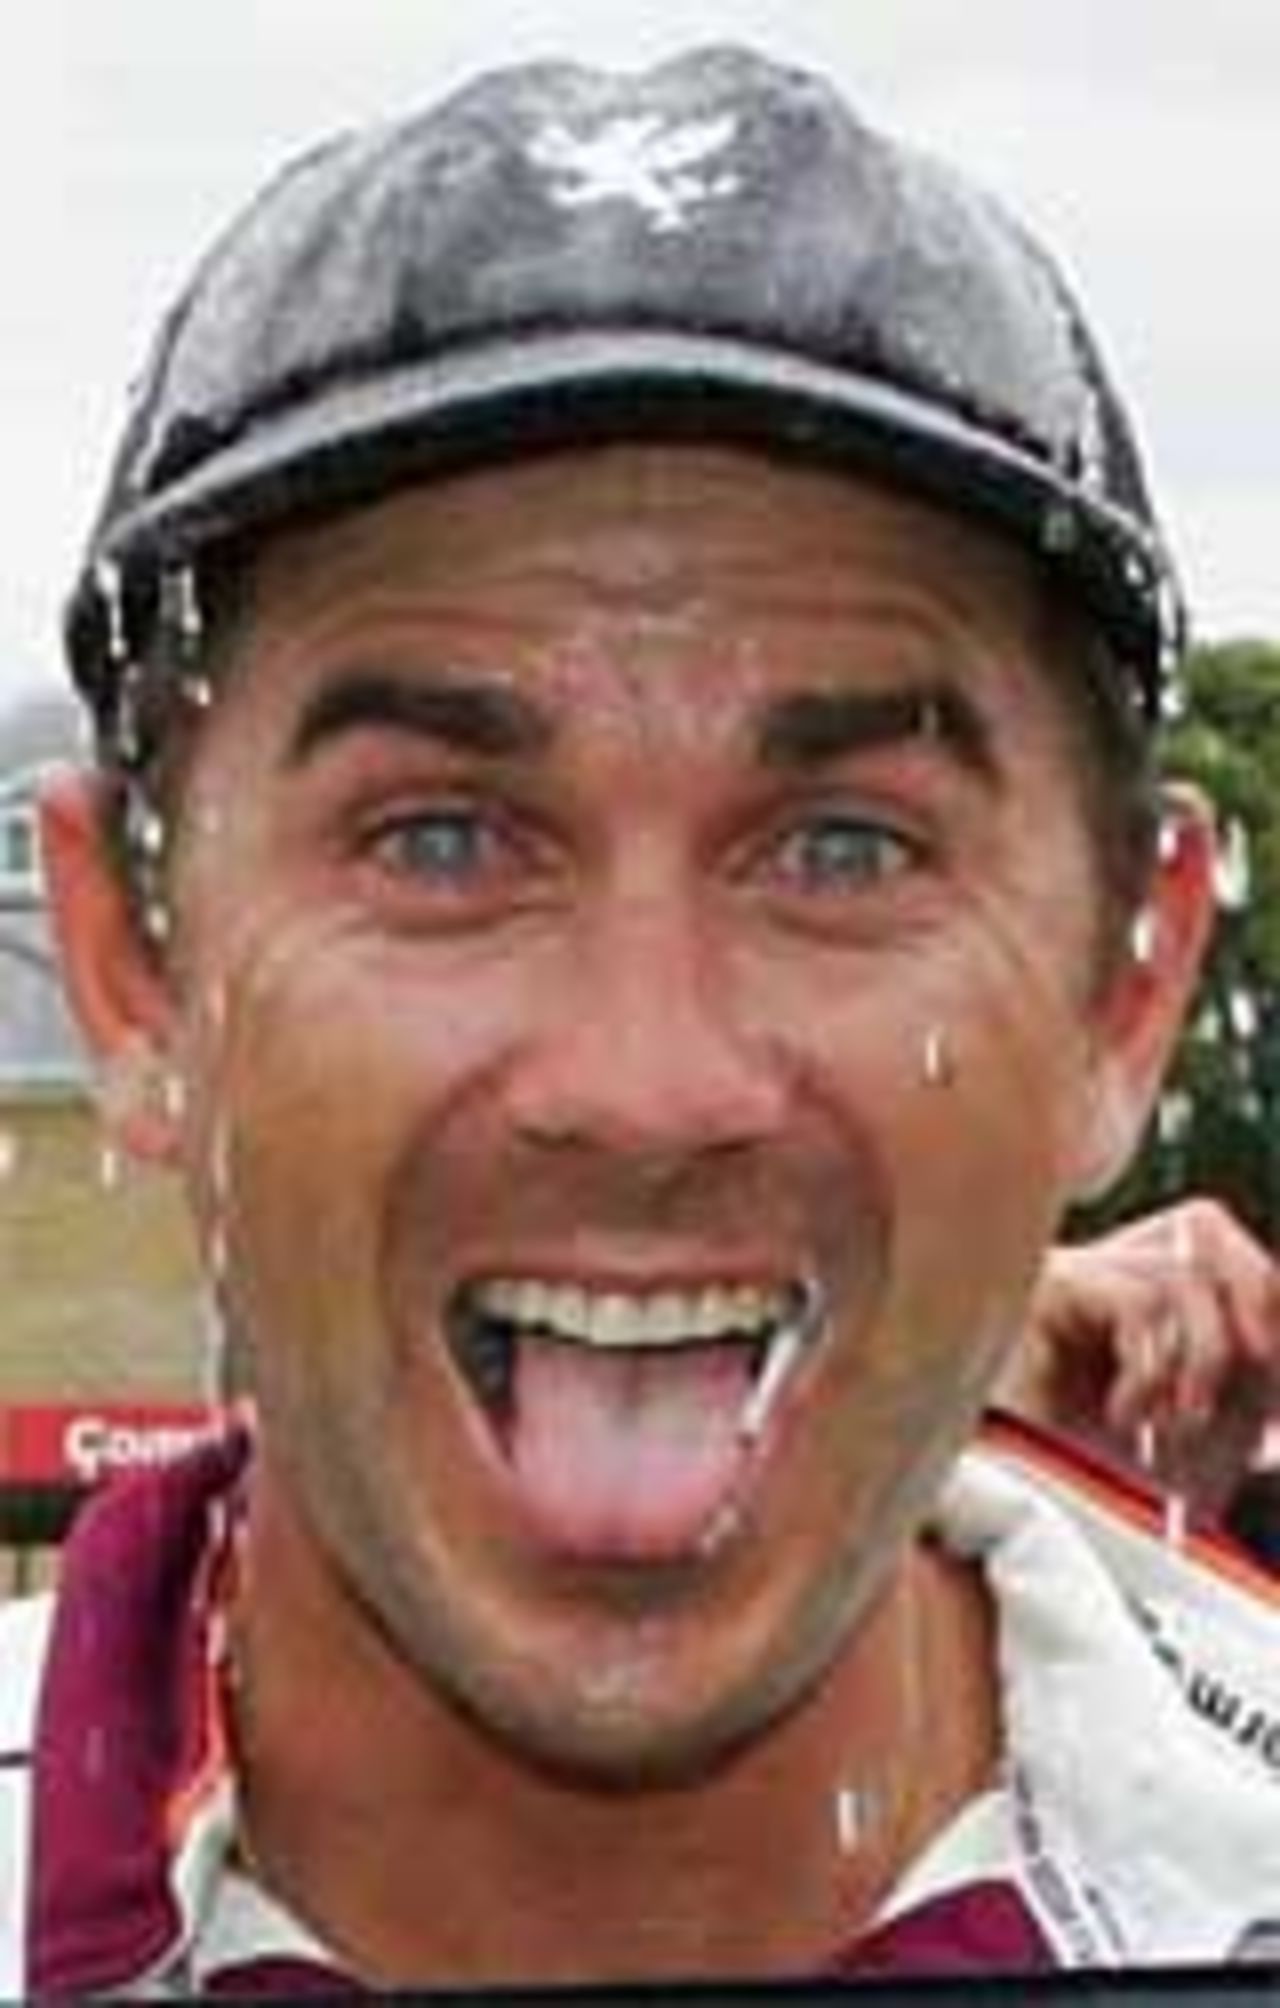 Justin Langer leads the celebrations as Somerset are crowned Division Two champions, Essex v Somerset, County Championship, Chelmsford, September 7, 2007